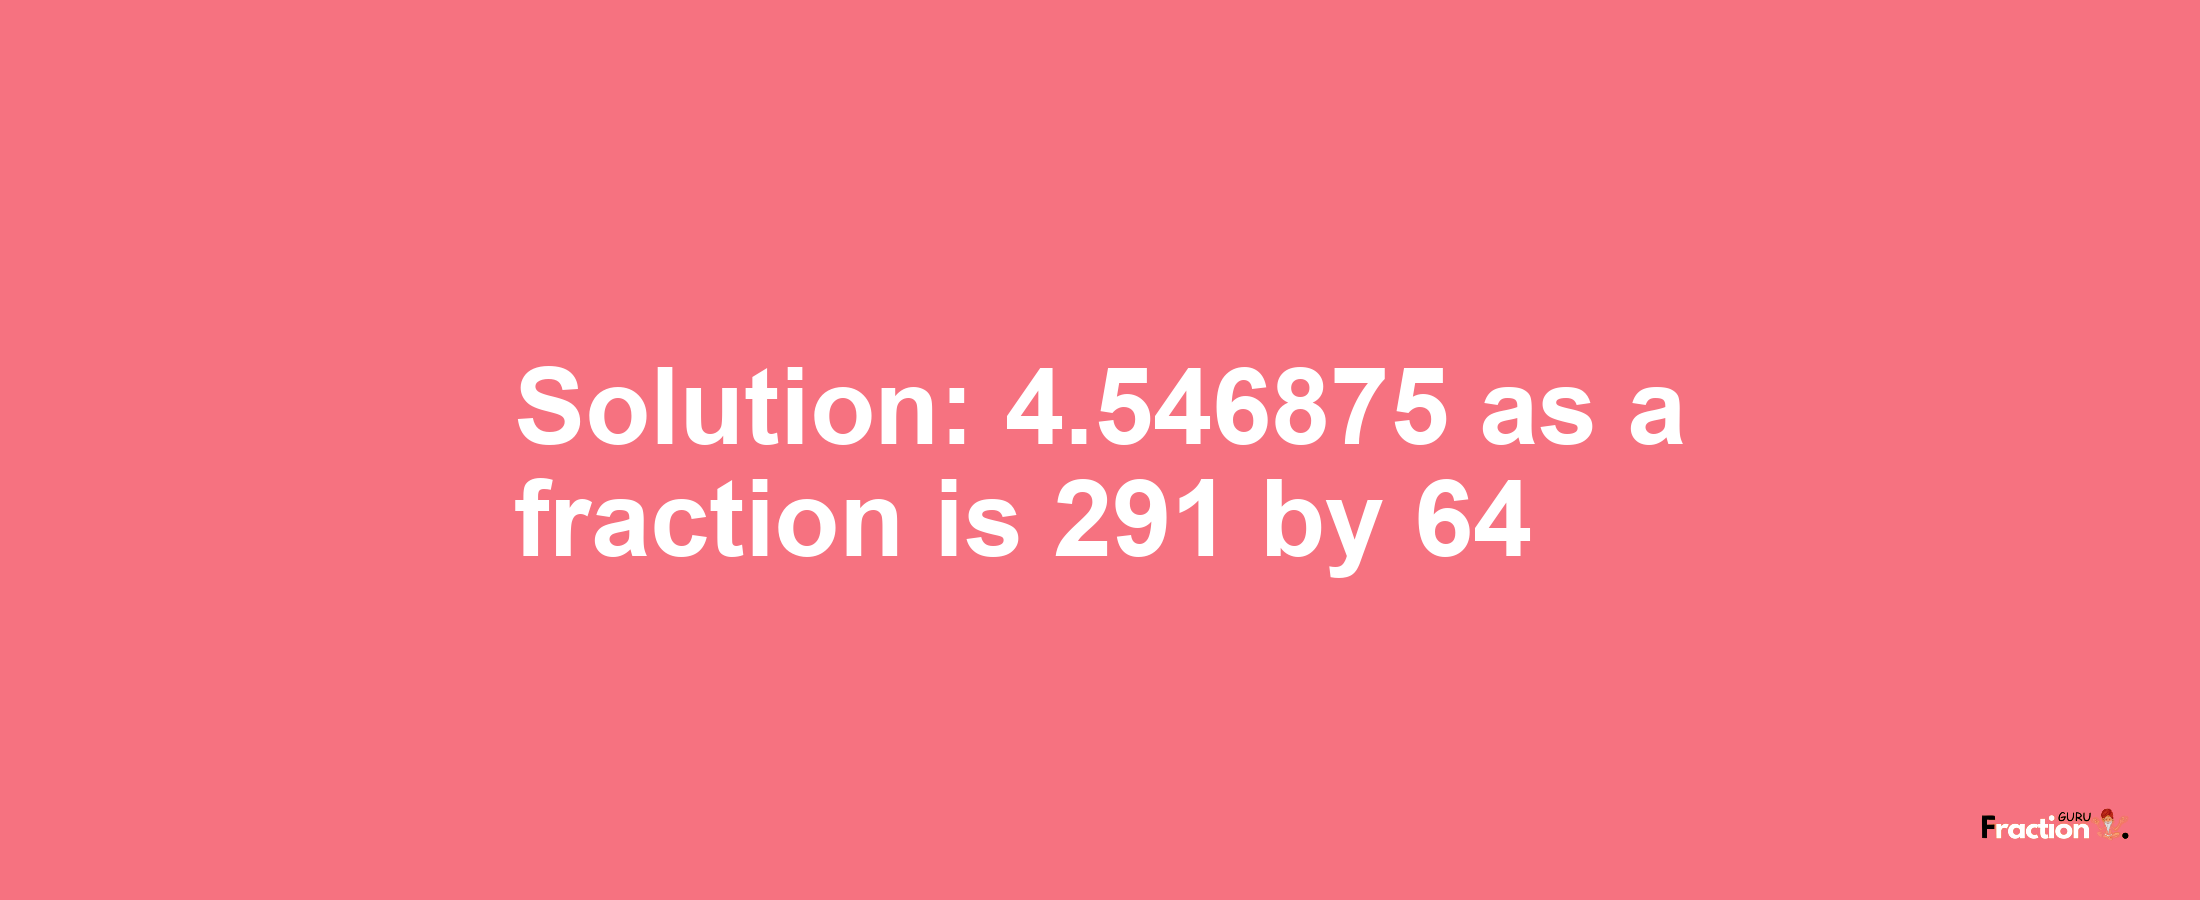 Solution:4.546875 as a fraction is 291/64